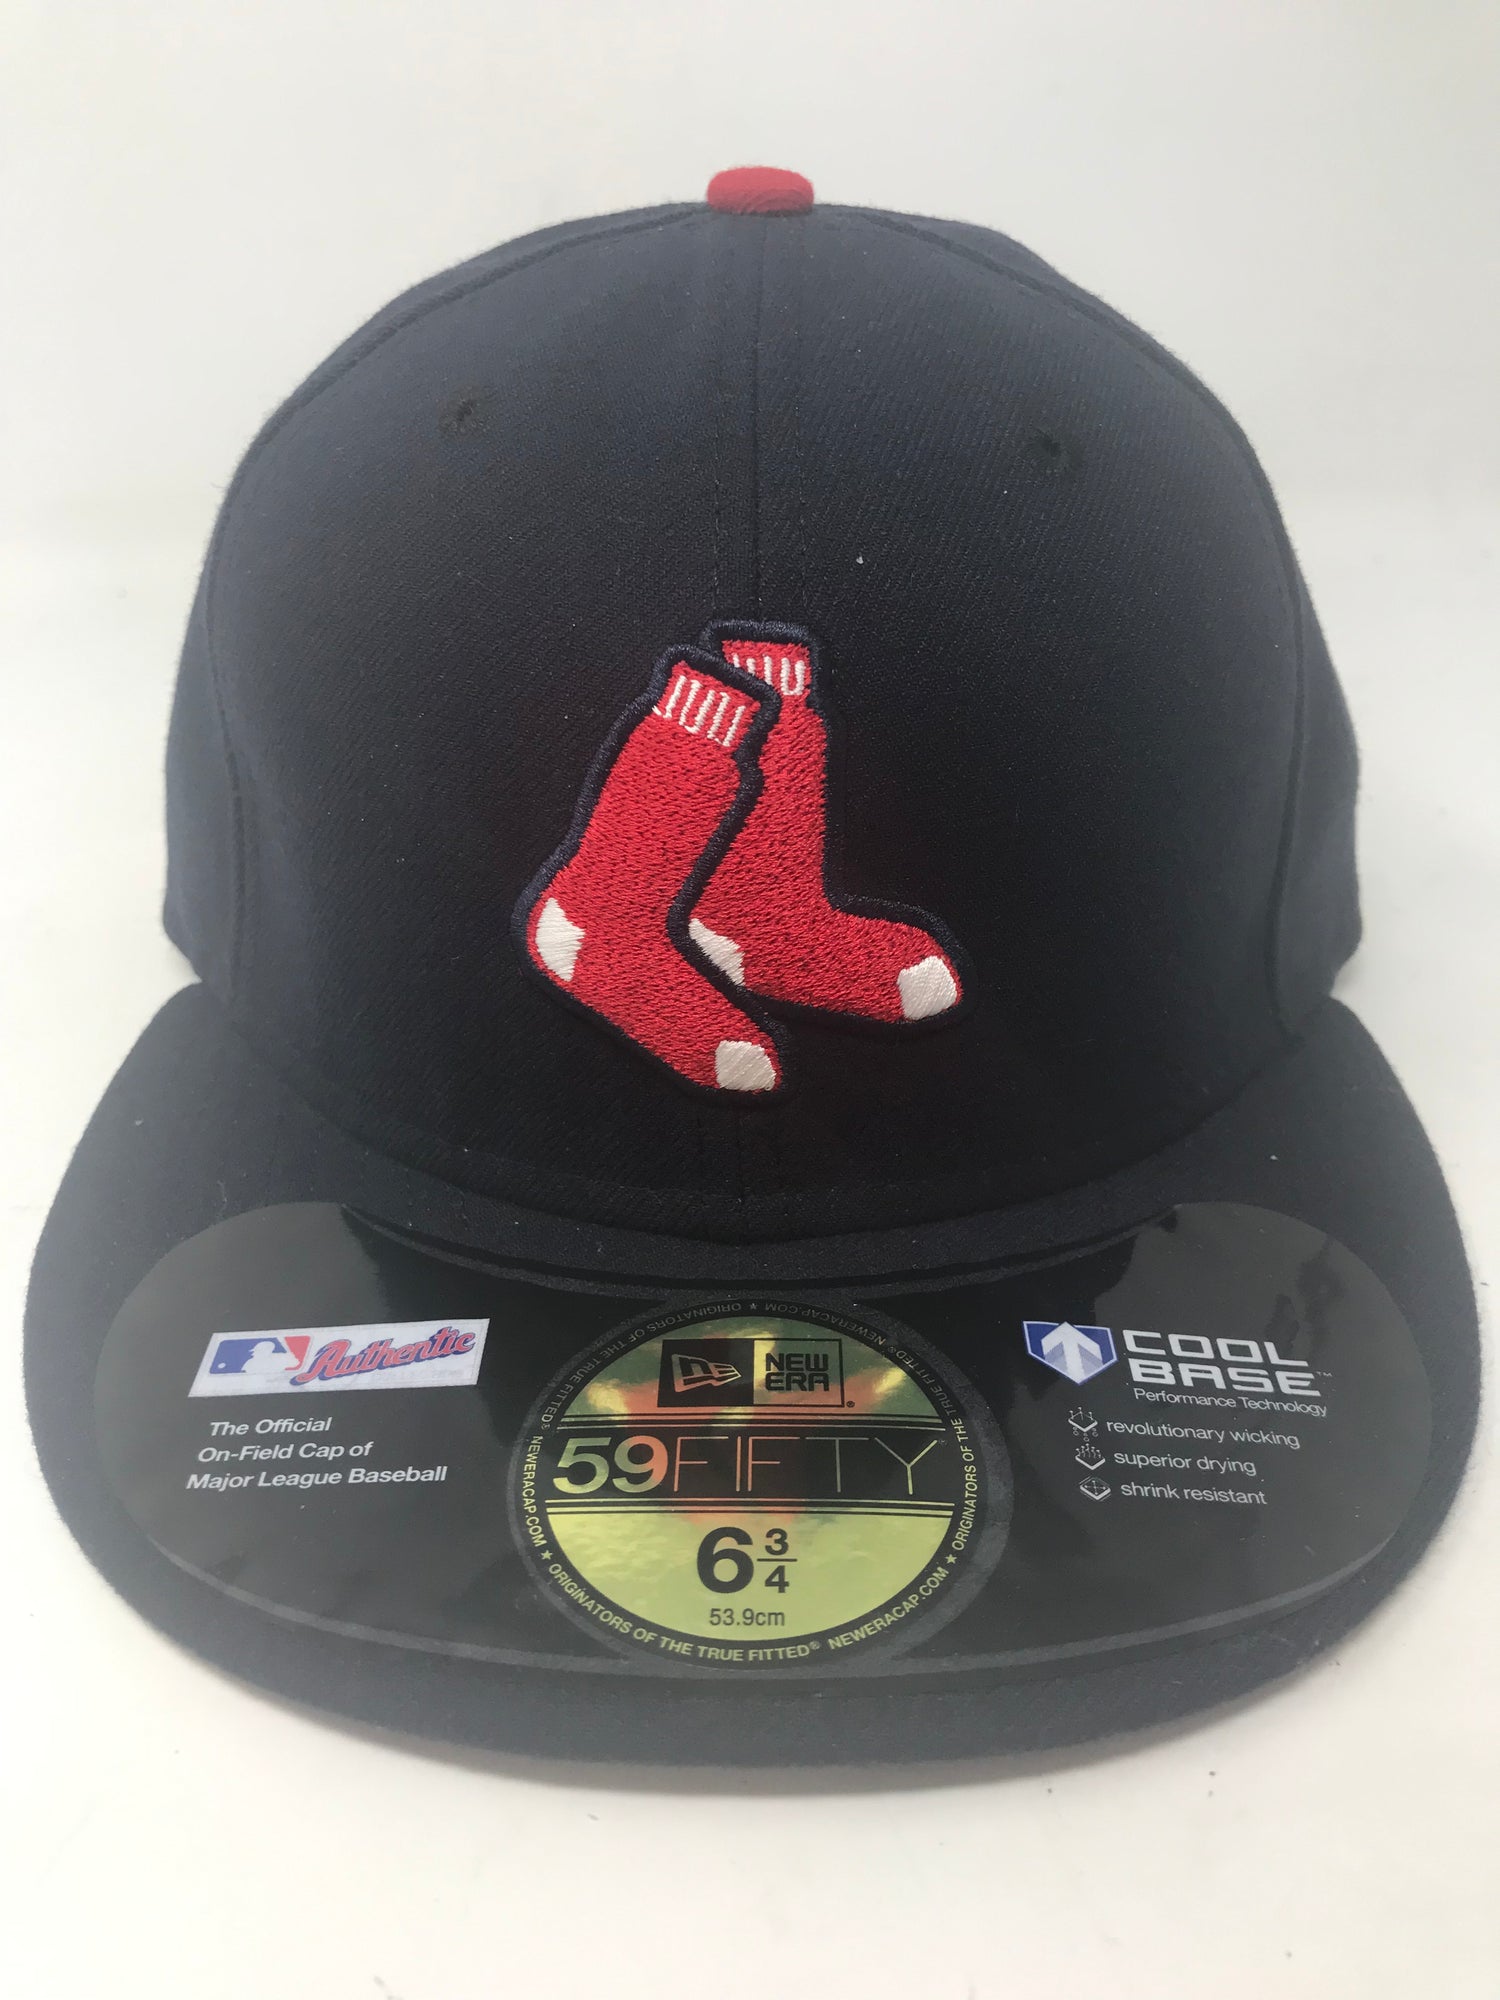 Boston Red Sox new era cool base 59fifty on field Hat